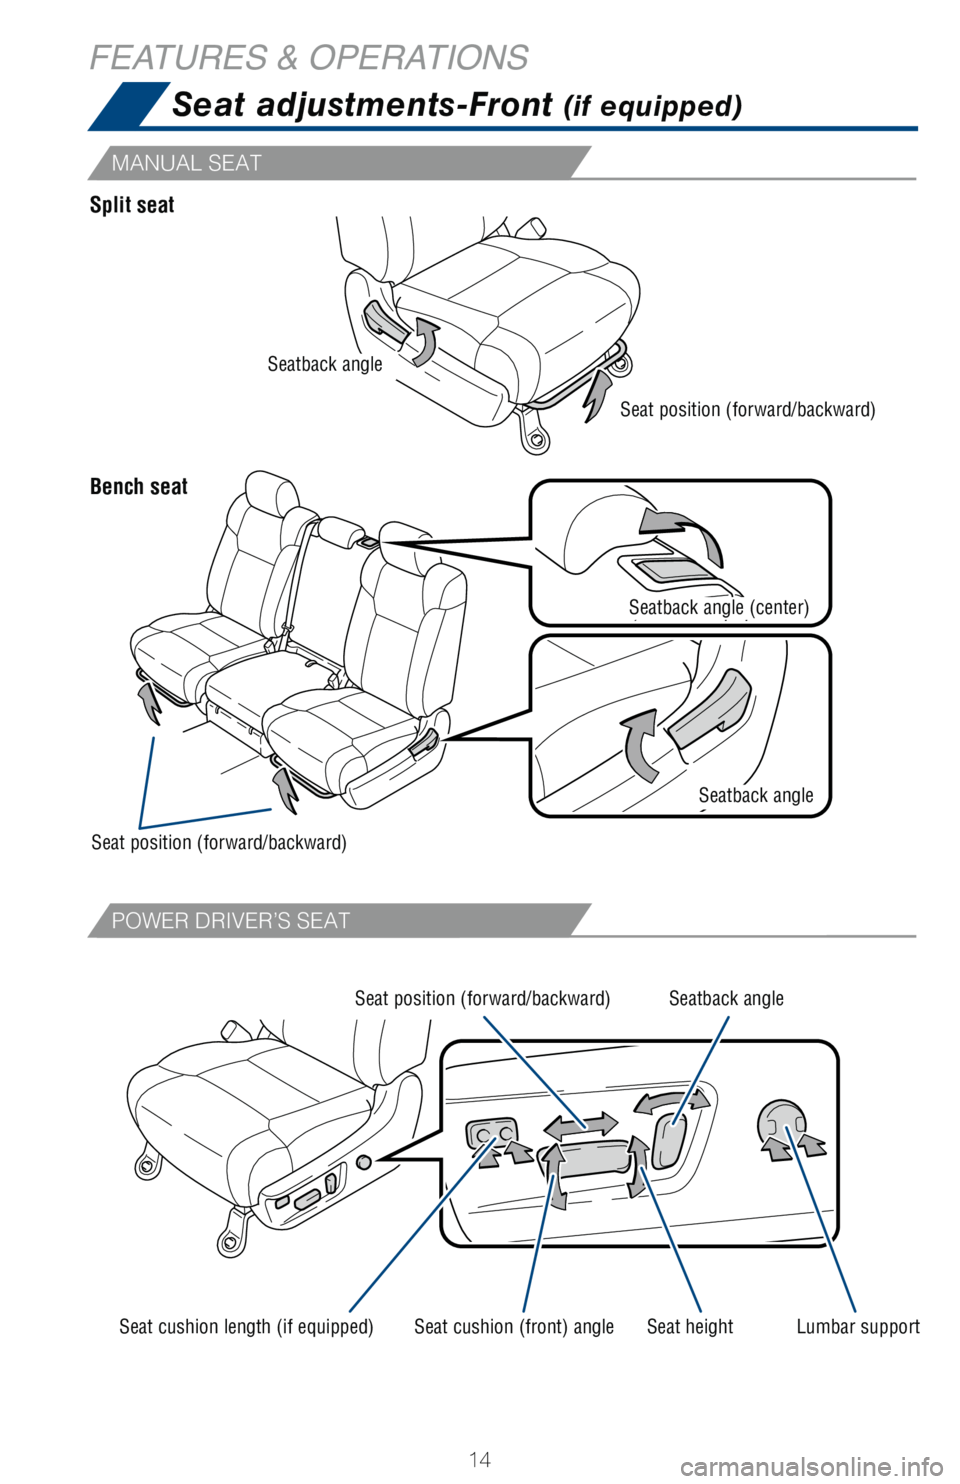 TOYOTA TUNDRA 2018  Owners Manual (in English) 14
FEATURES & OPERATIONSSeat adjustments-Front 
(if equipped)
Bench seat Split seat
MANUAL SEAT
POWER DRIVER’S SEAT
Seat position (forward/backward)
Seat cushion length (if equipped) Seat height Lum